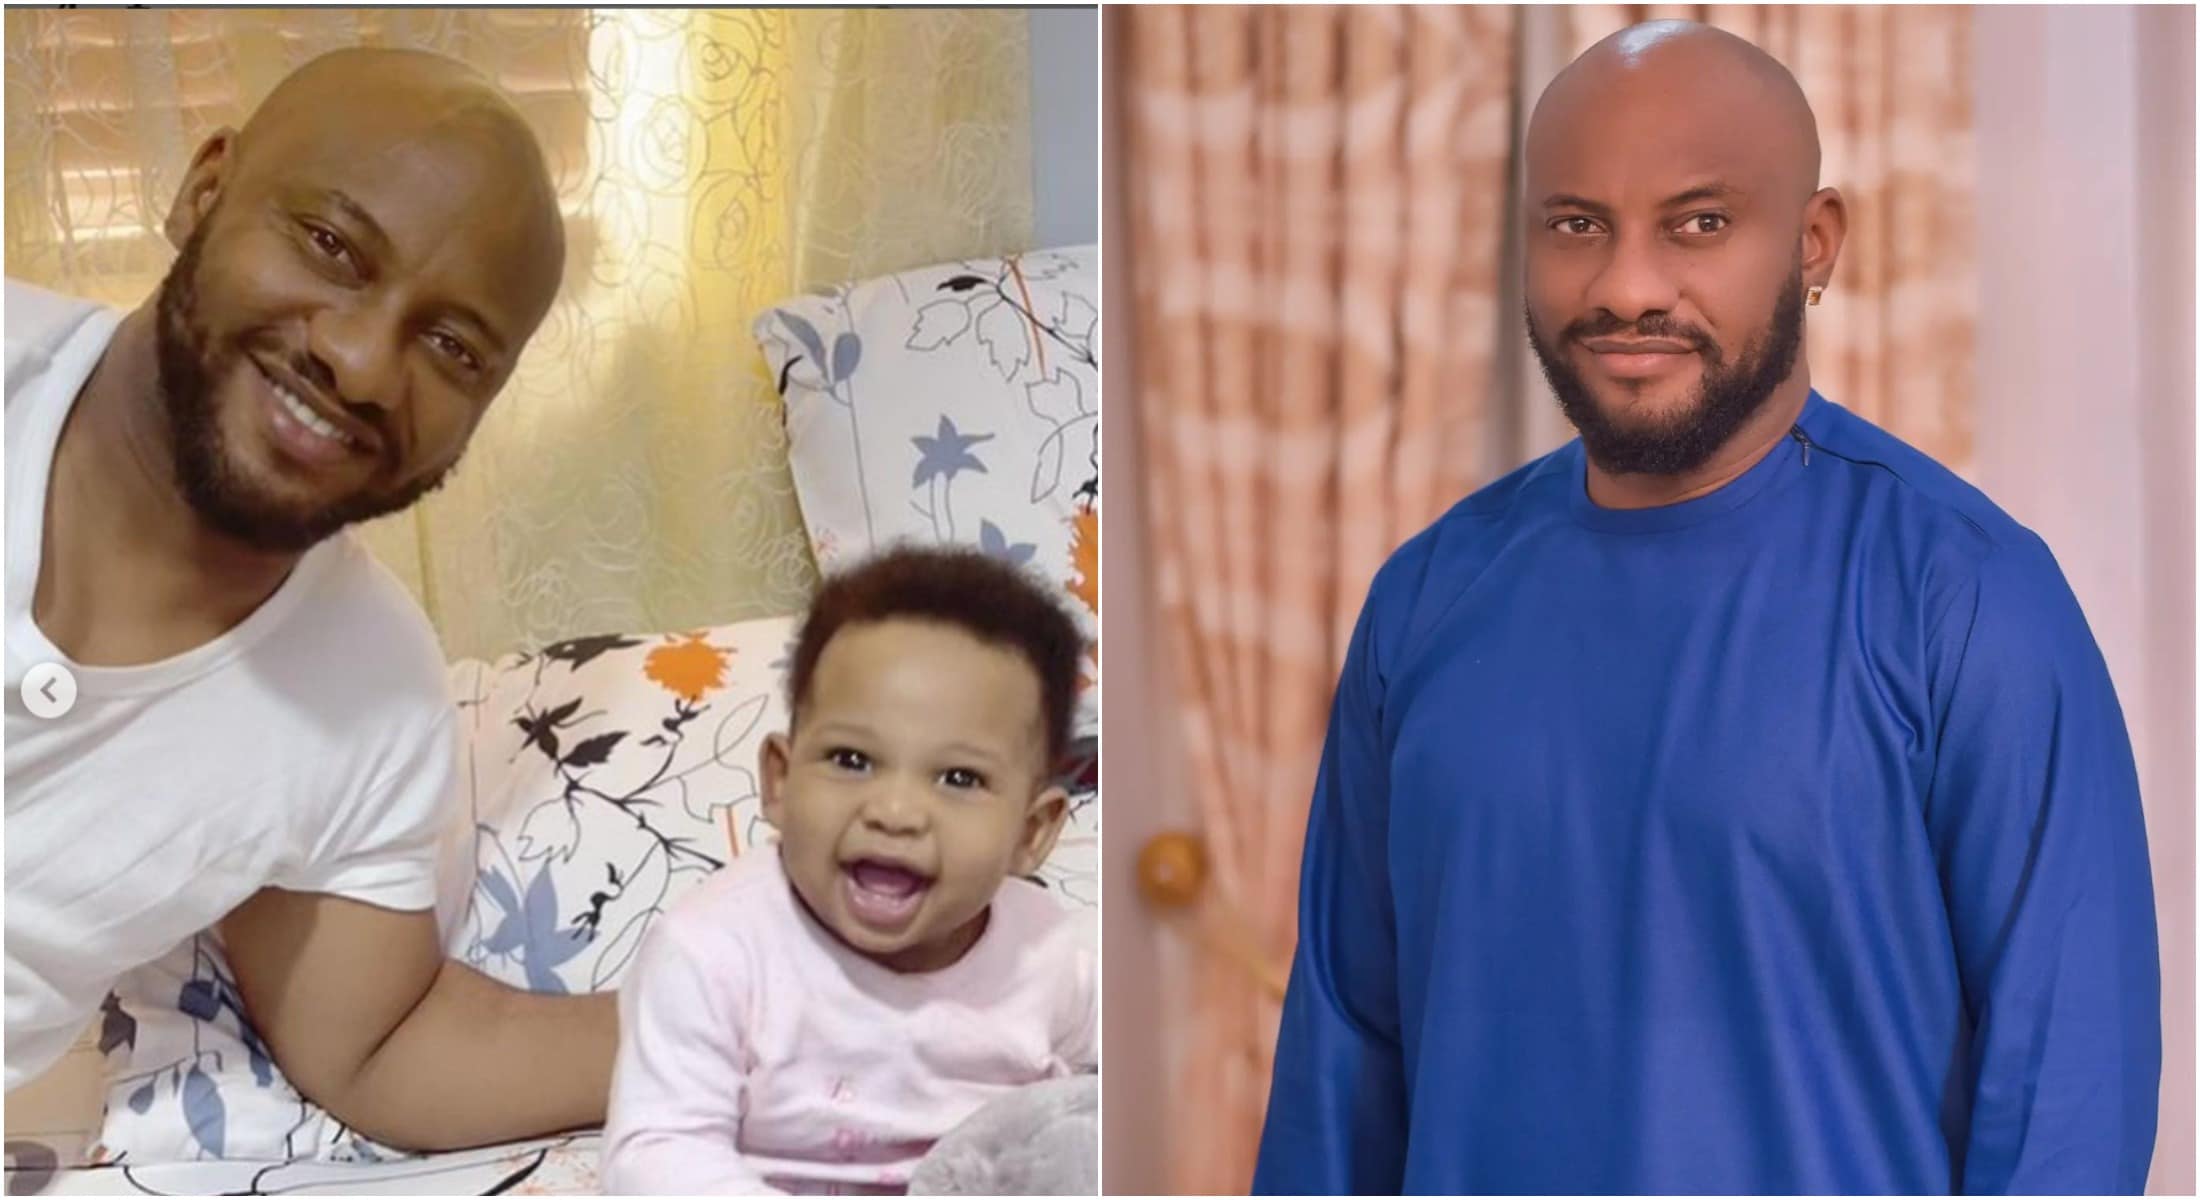 Yul Edochie and son